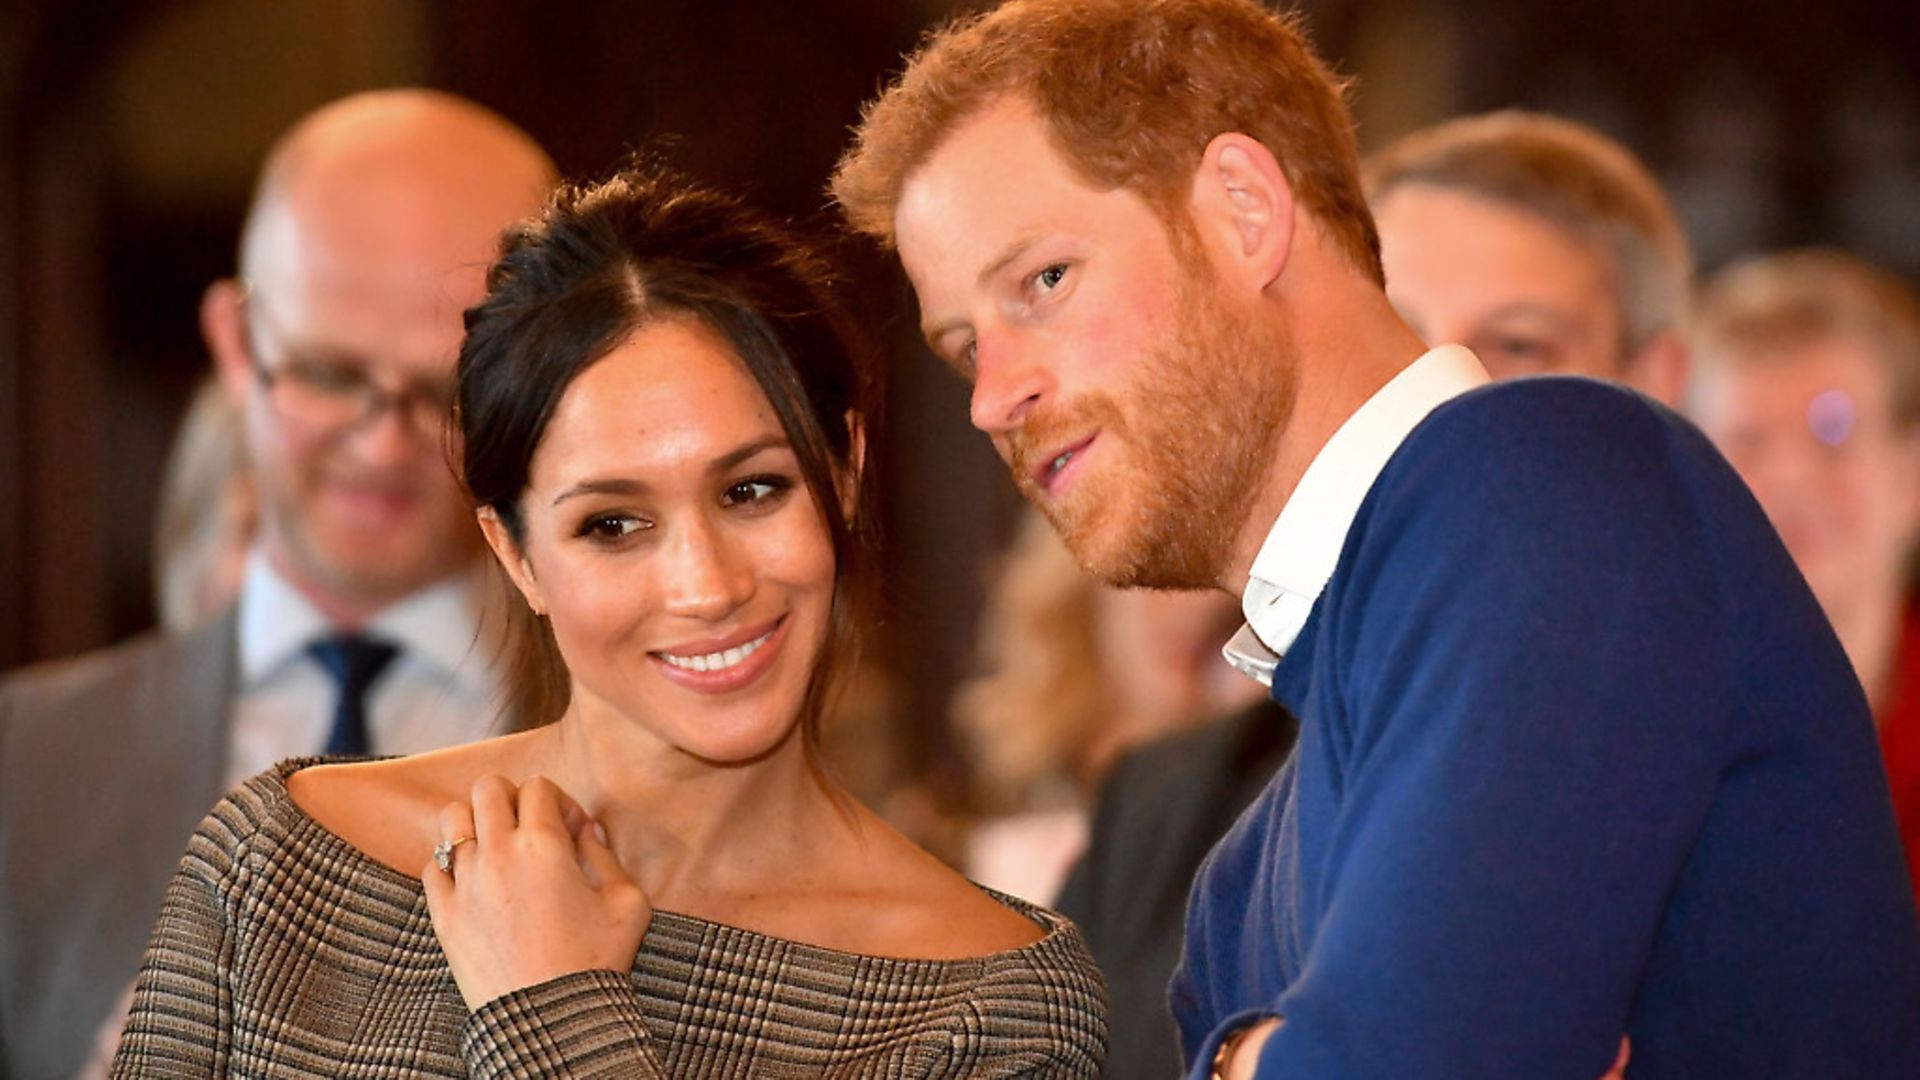 Prince Harry whispers to Meghan Markle as they watch a dance performance by Jukebox Collective in the banqueting hall during a visit to Cardiff Castle. Photo: PA Wire/PA Images